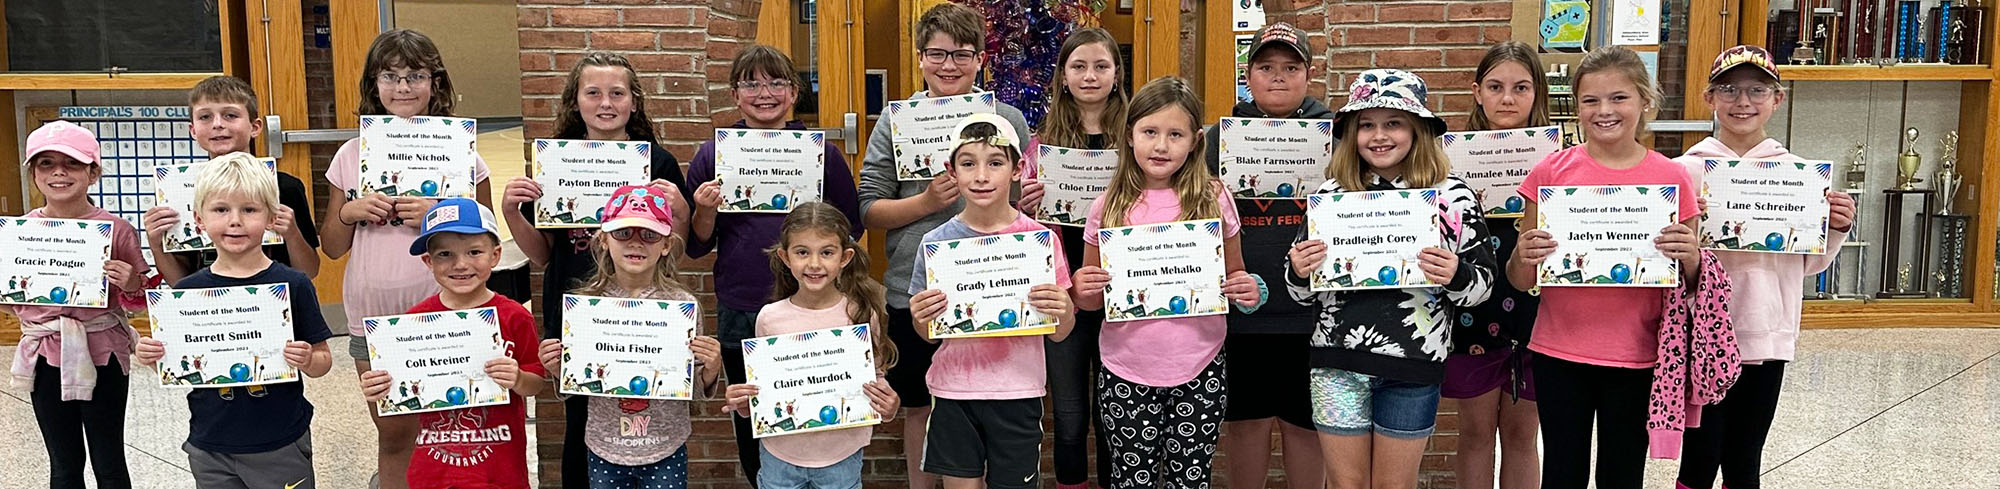 Group of happy elementary students holding up certificates